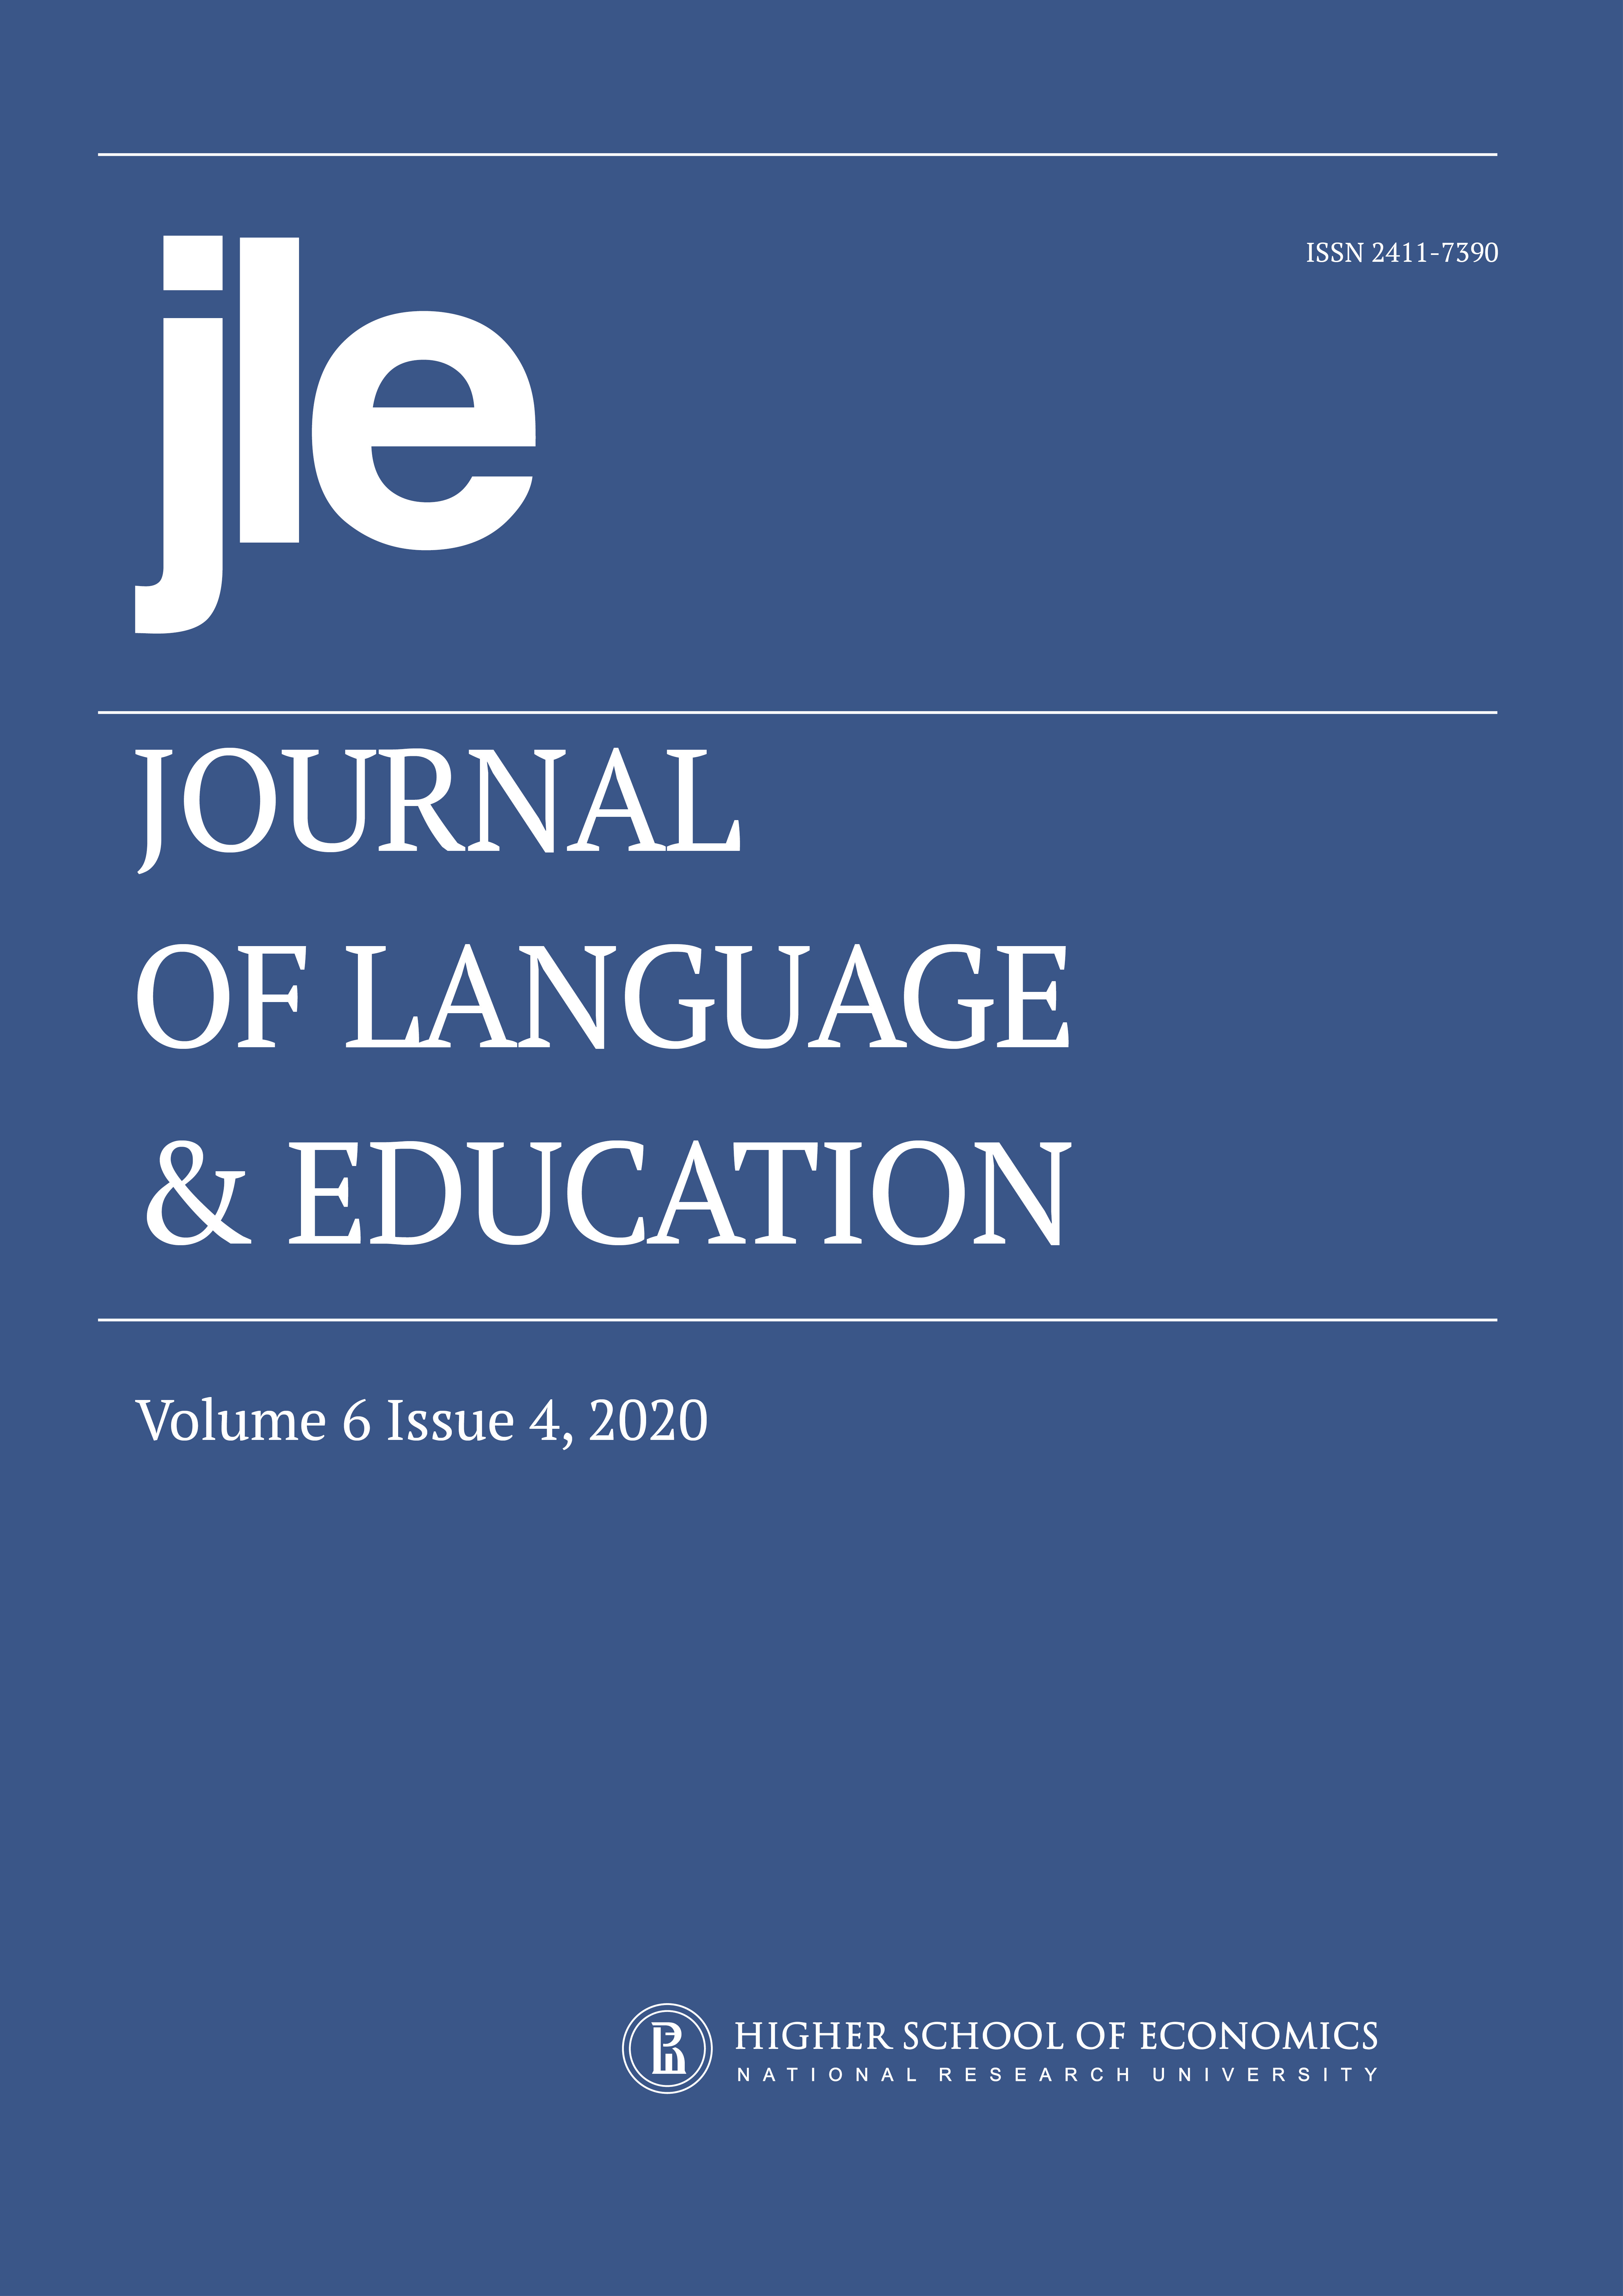 journal article in education